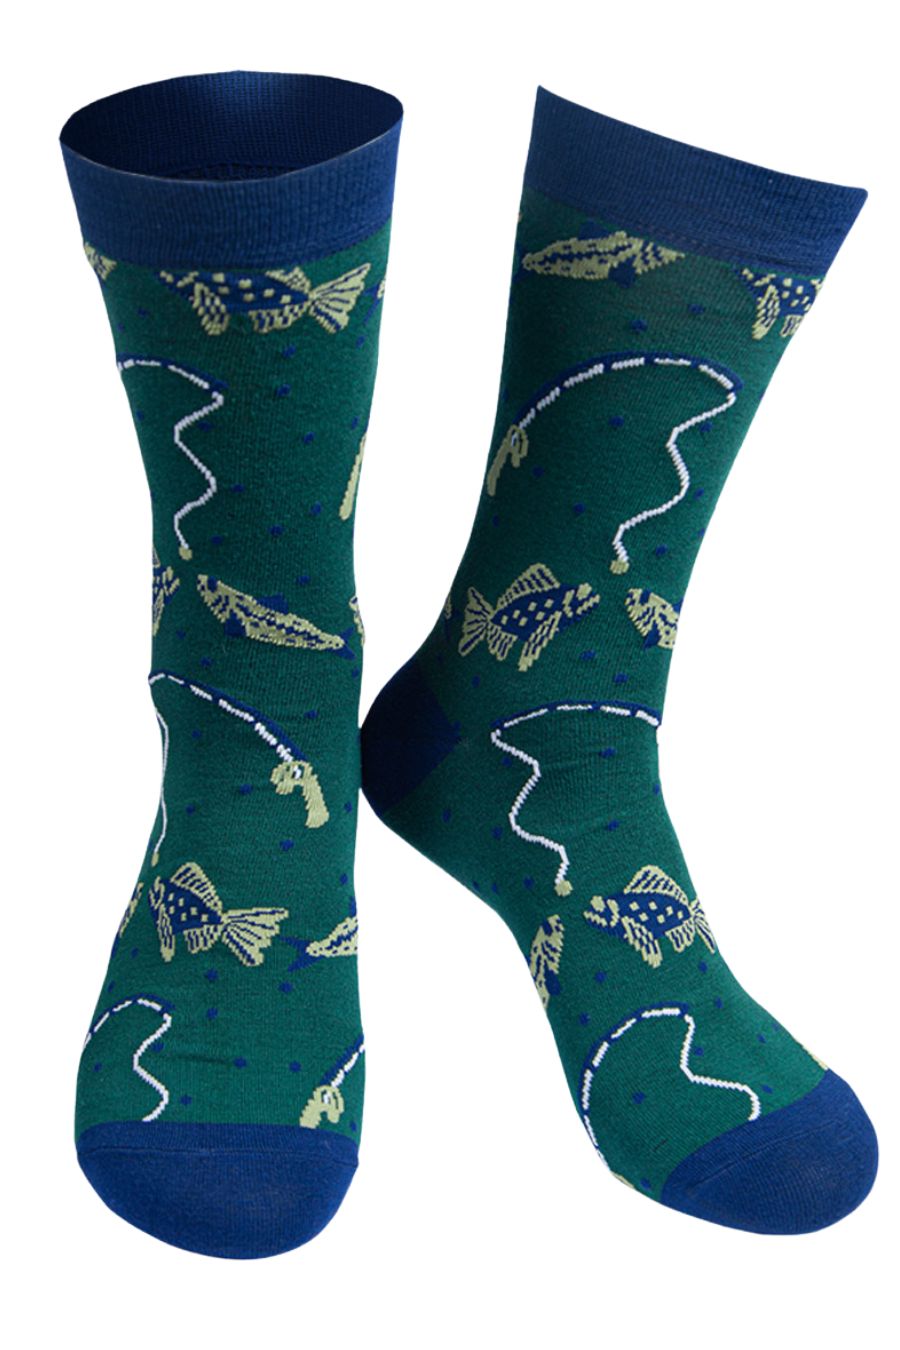 green bamboo socks with fish and a fishing line